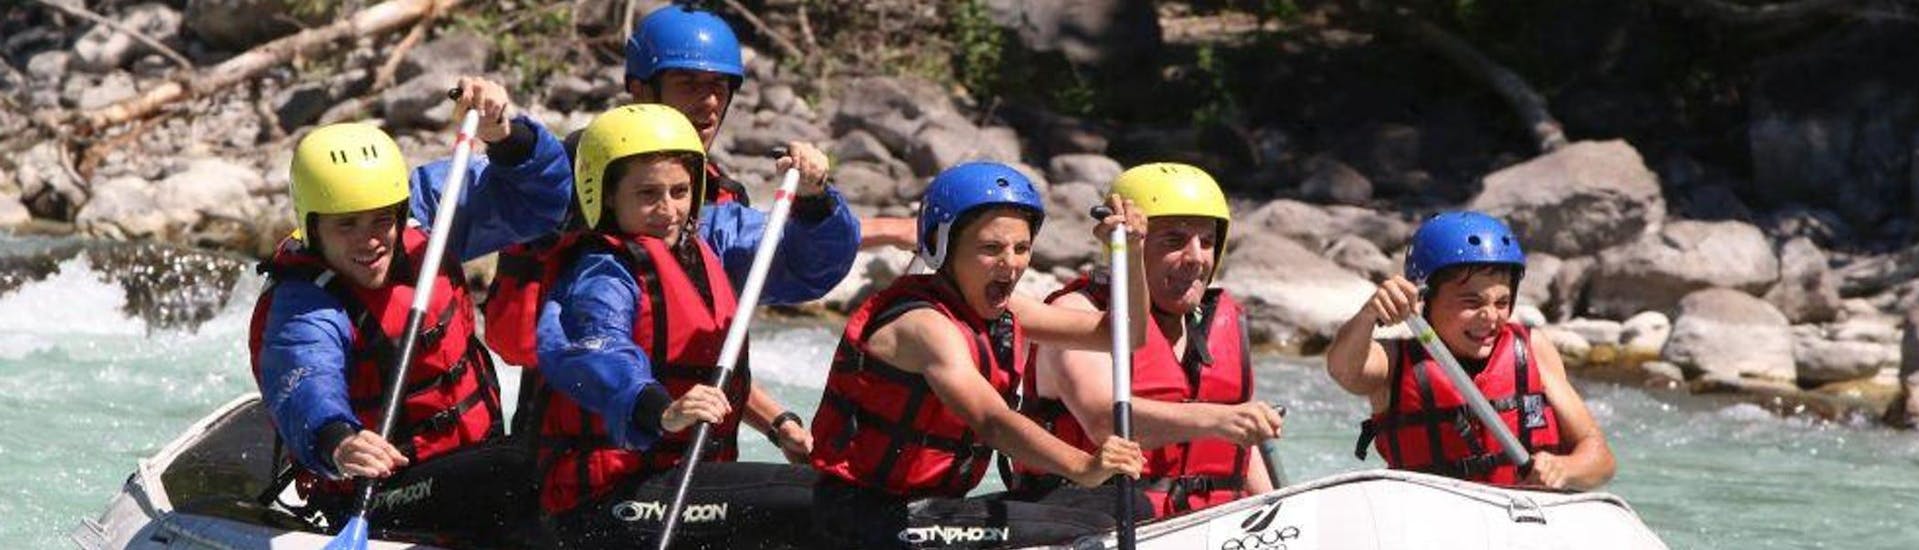 A group is enjoying the Rafting on Guil River for Adventurers activity operated by Ecrins Eaux Vives.